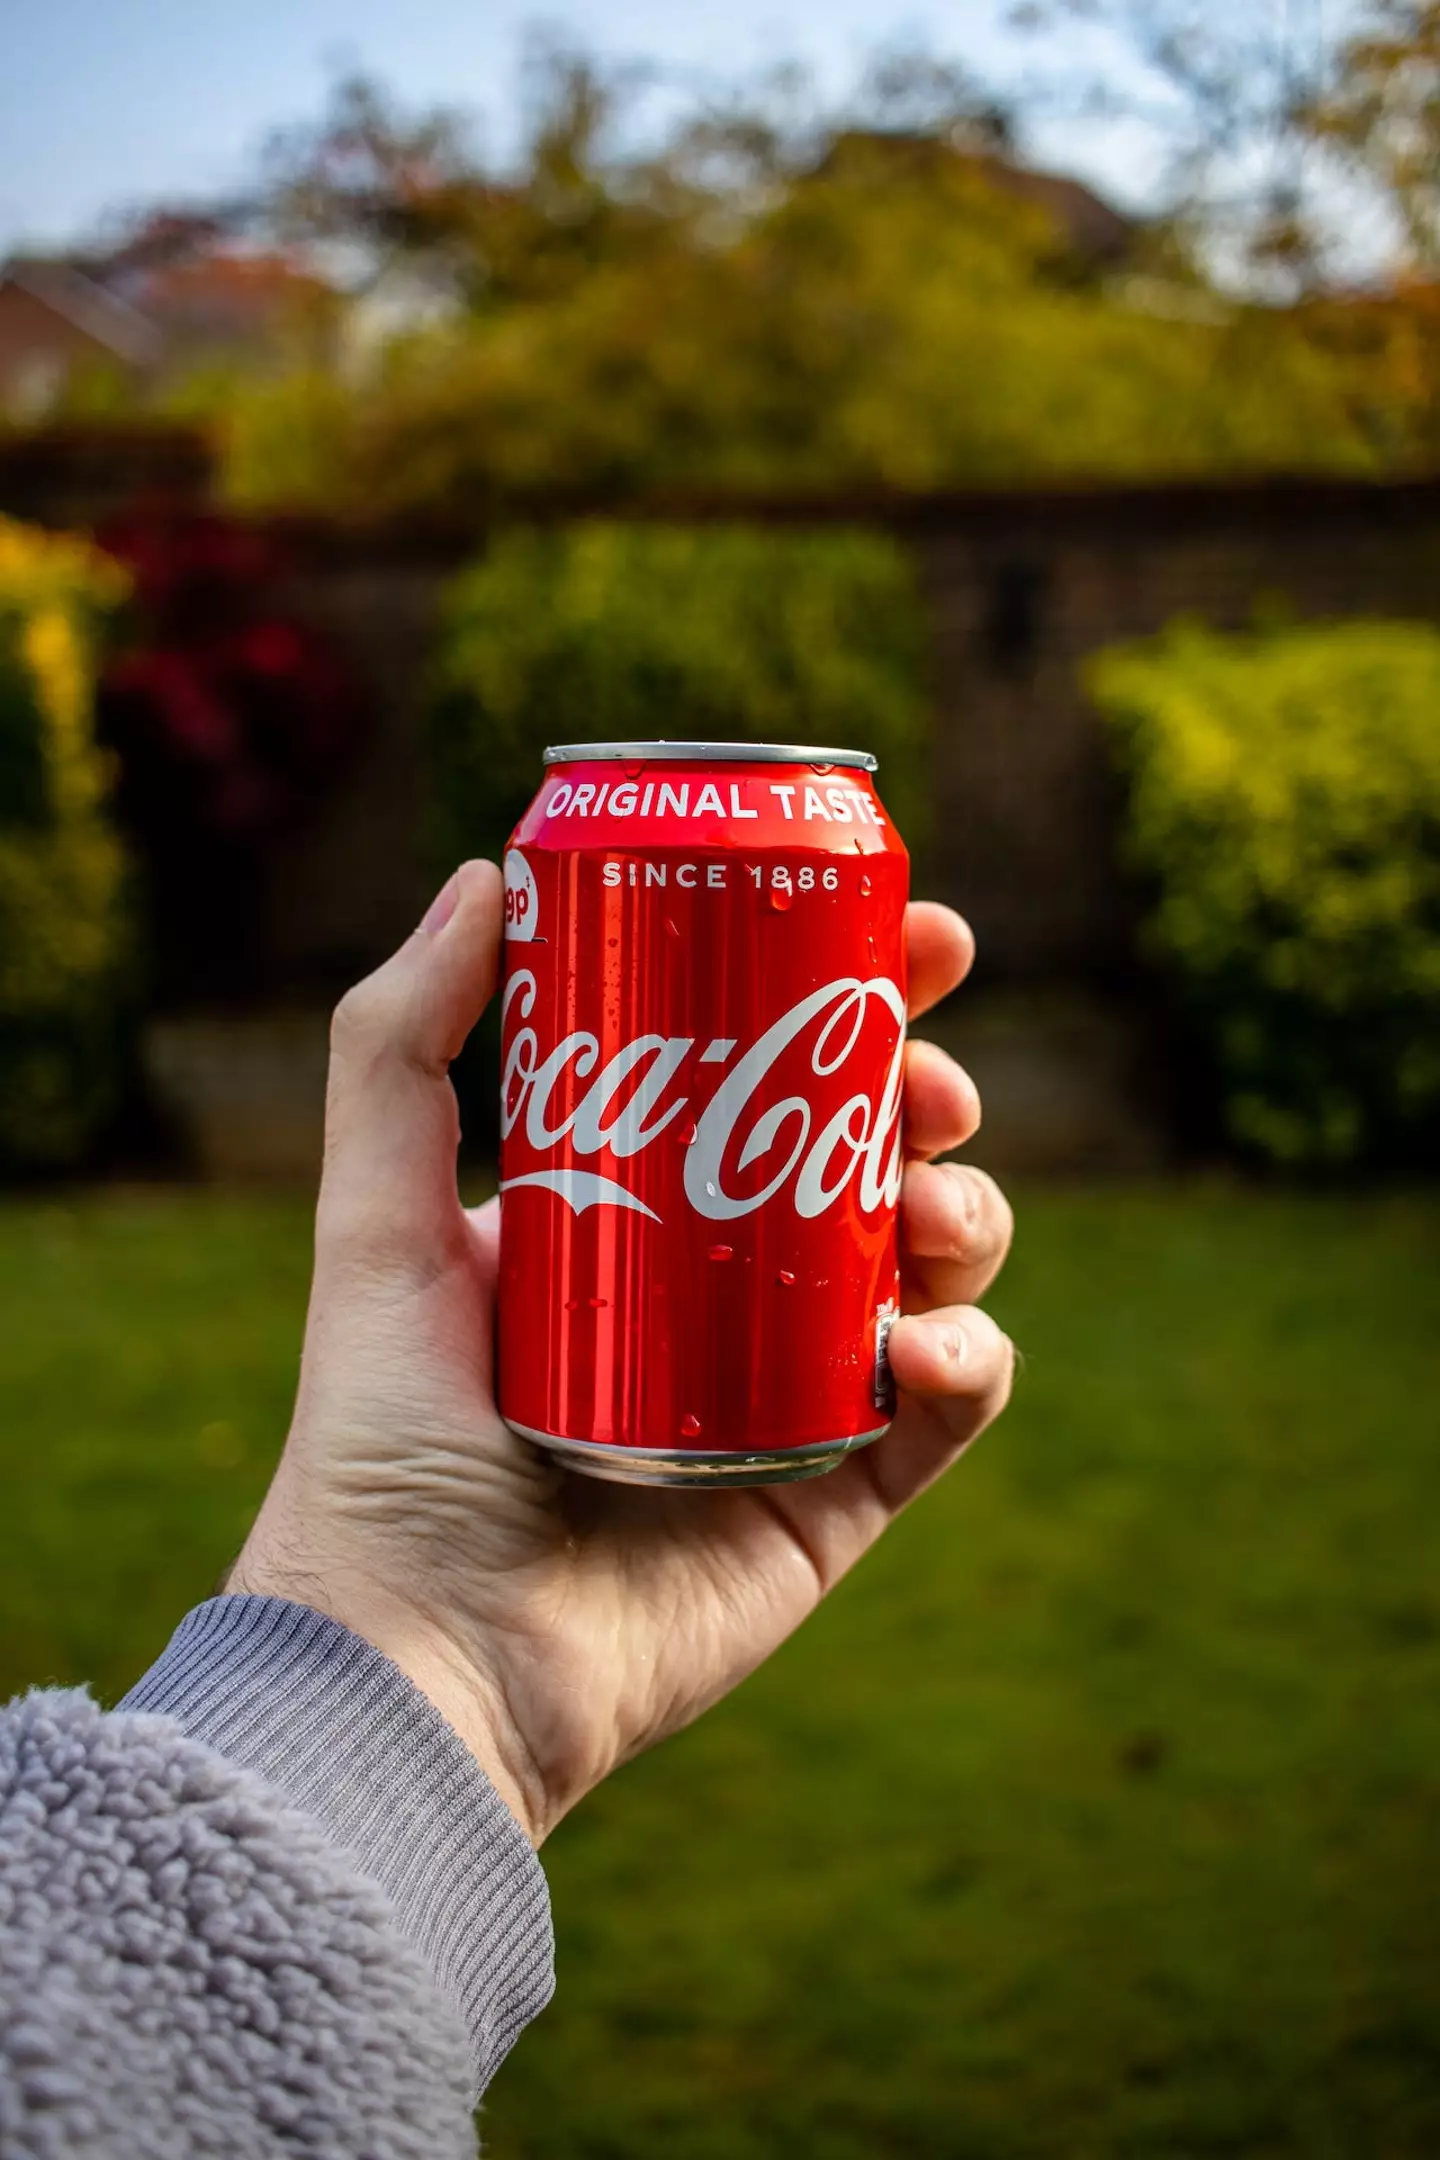 Do you know why Coca-Cola's packaging has always been red?